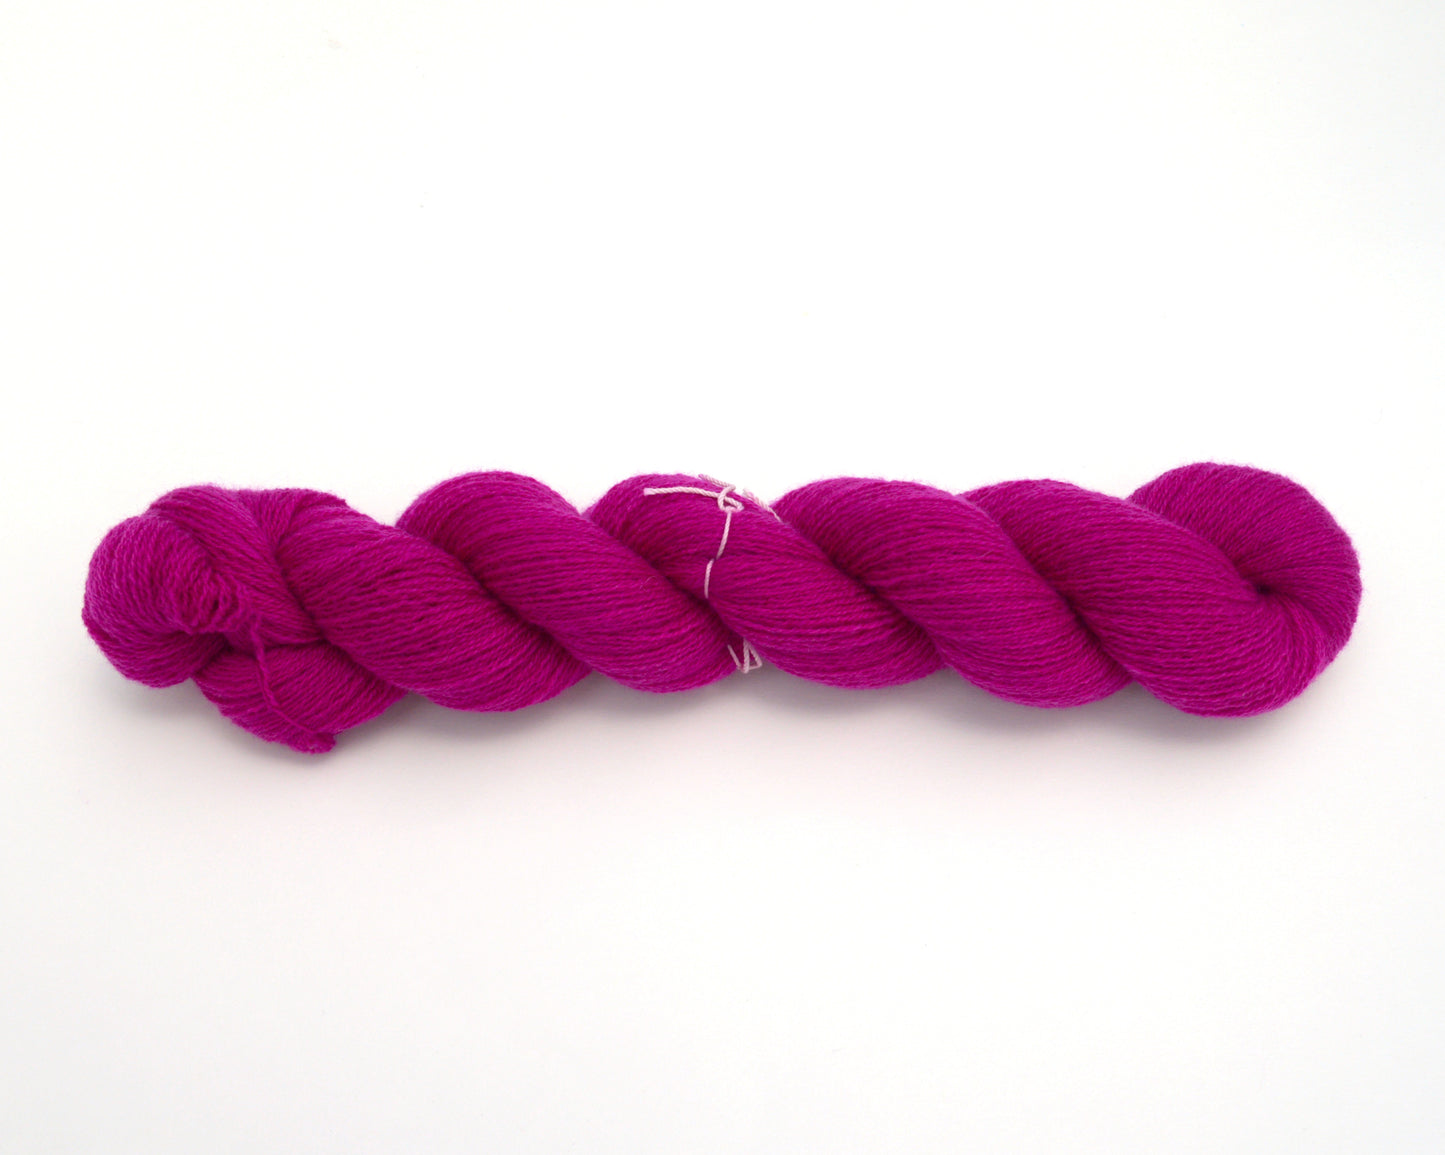 Lace Weight Recycled Cashmere Yarn in Fuchsia